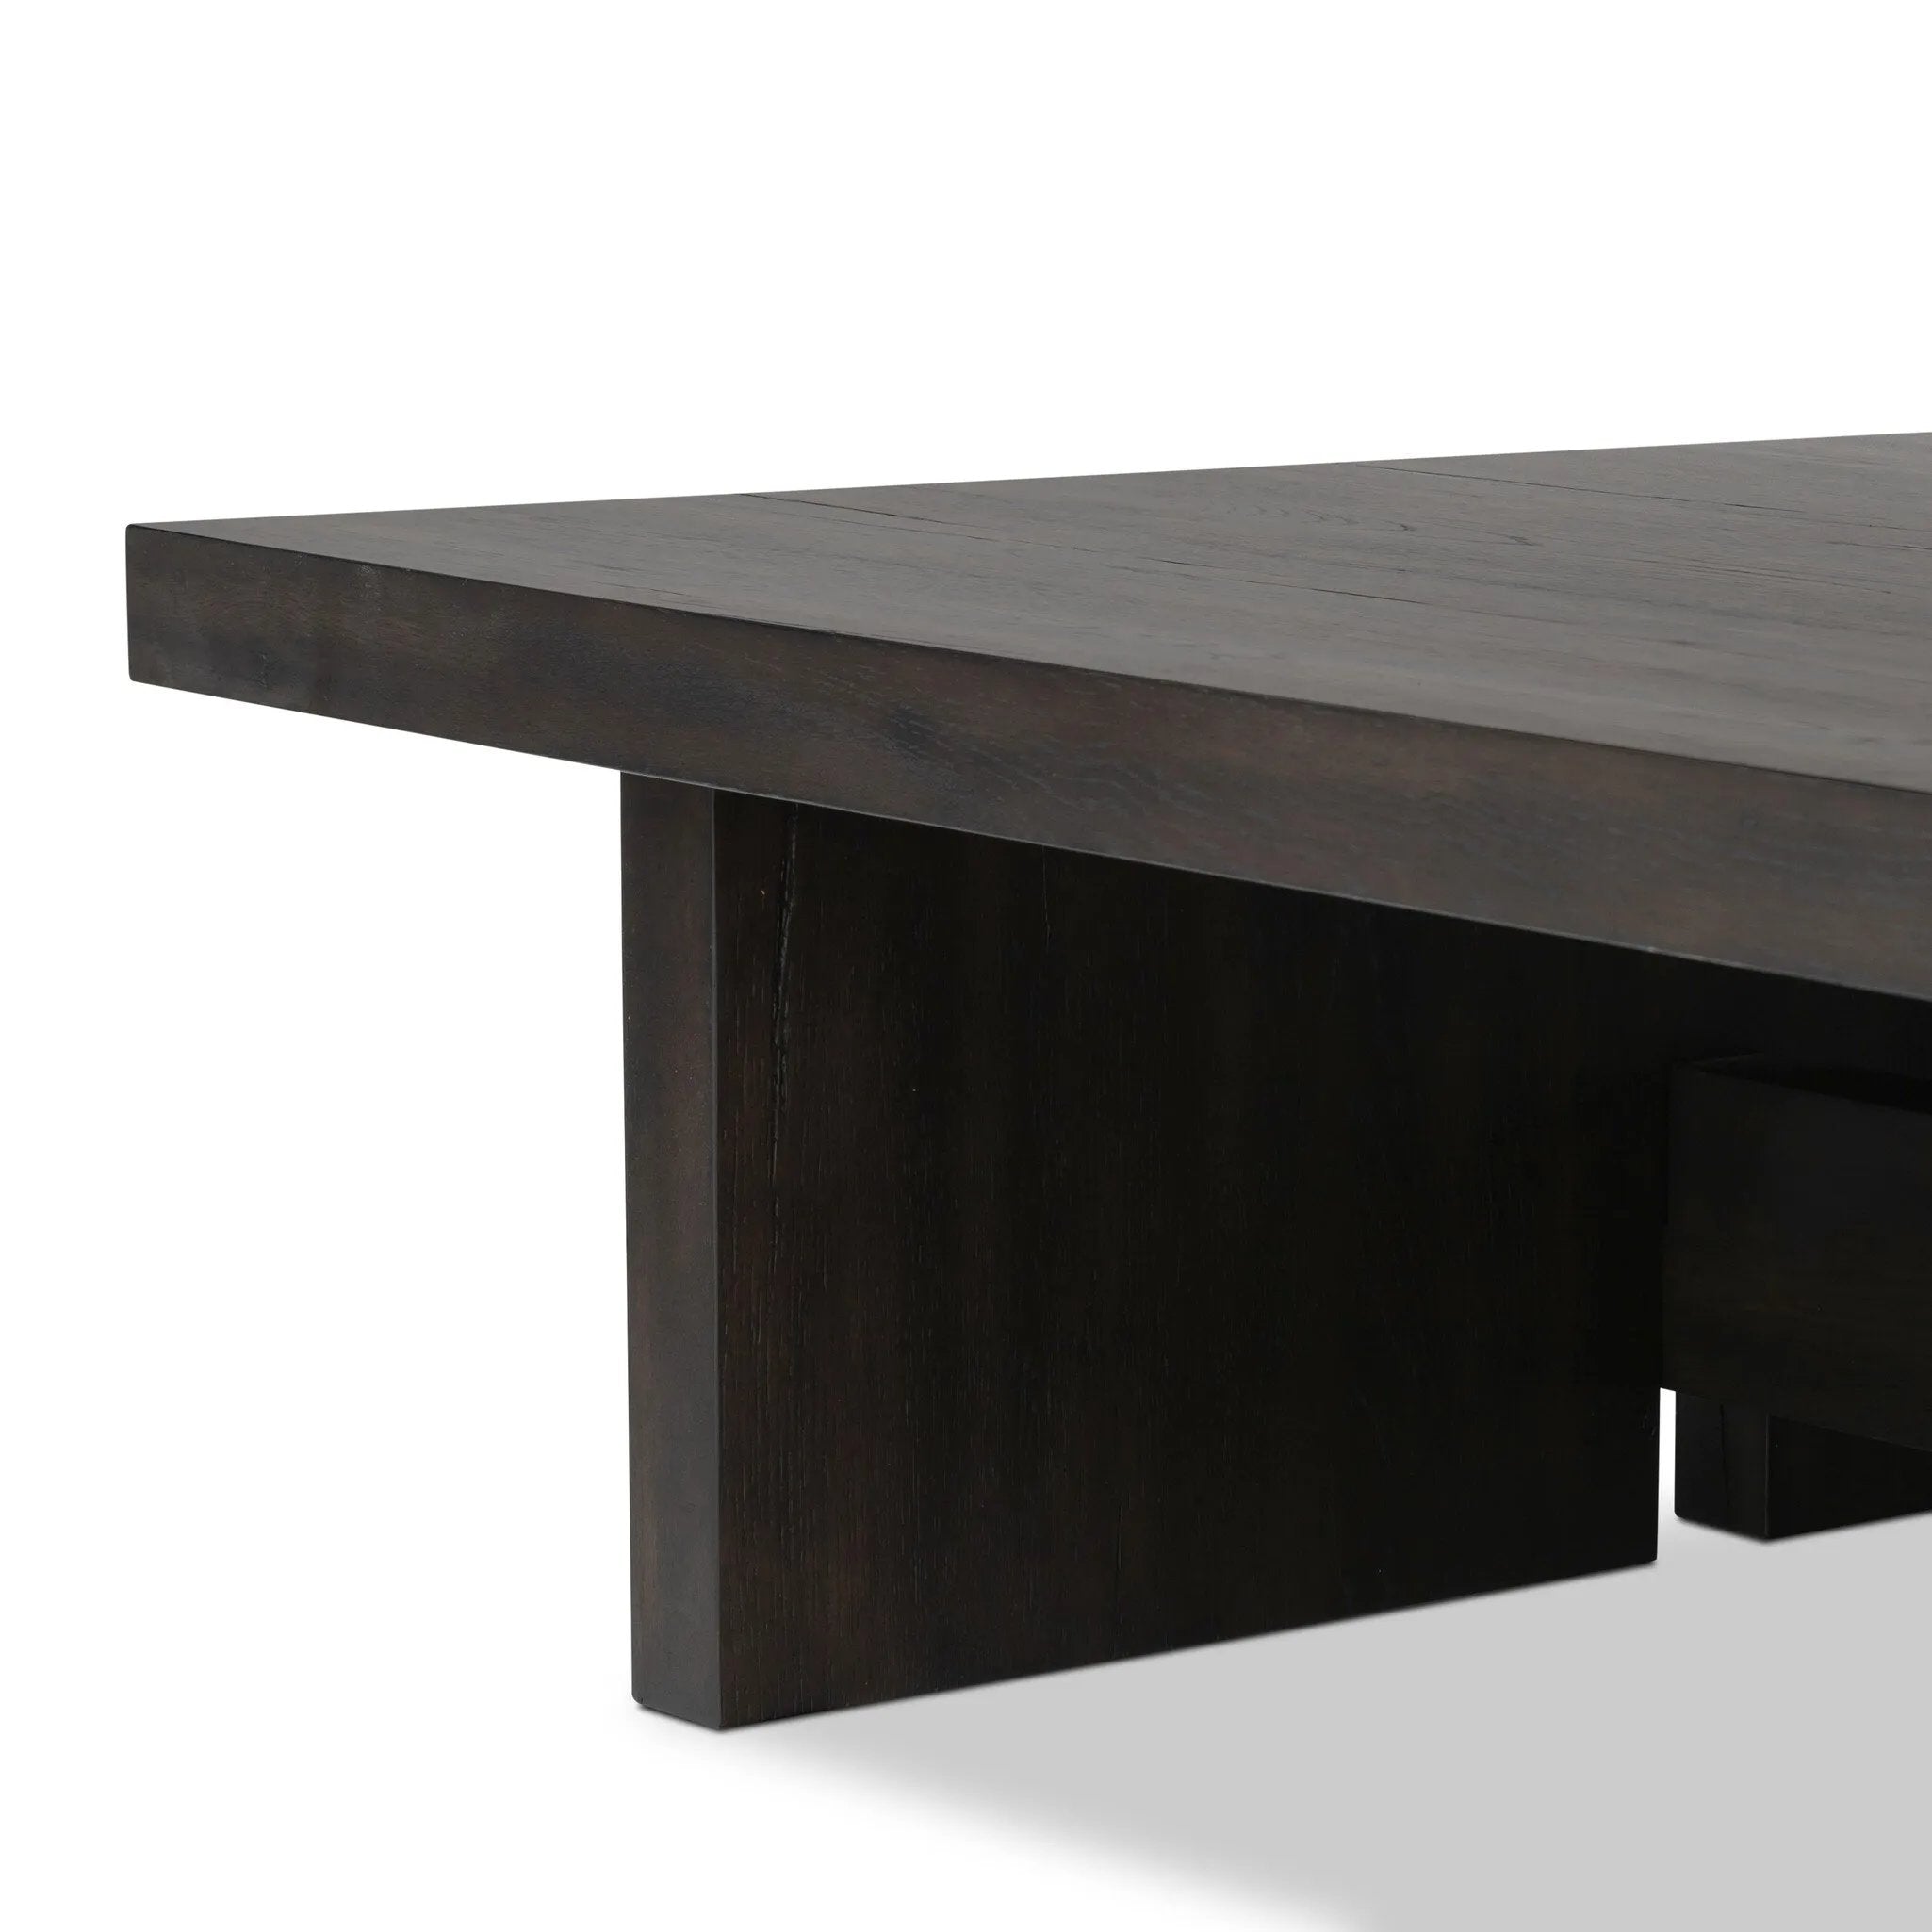 A substantially sized coffee table of smoked black oak features joint and connection construction for a design-forward look. Visible knots and graining add character.Collection: Haide Amethyst Home provides interior design, new home construction design consulting, vintage area rugs, and lighting in the Winter Garden metro area.